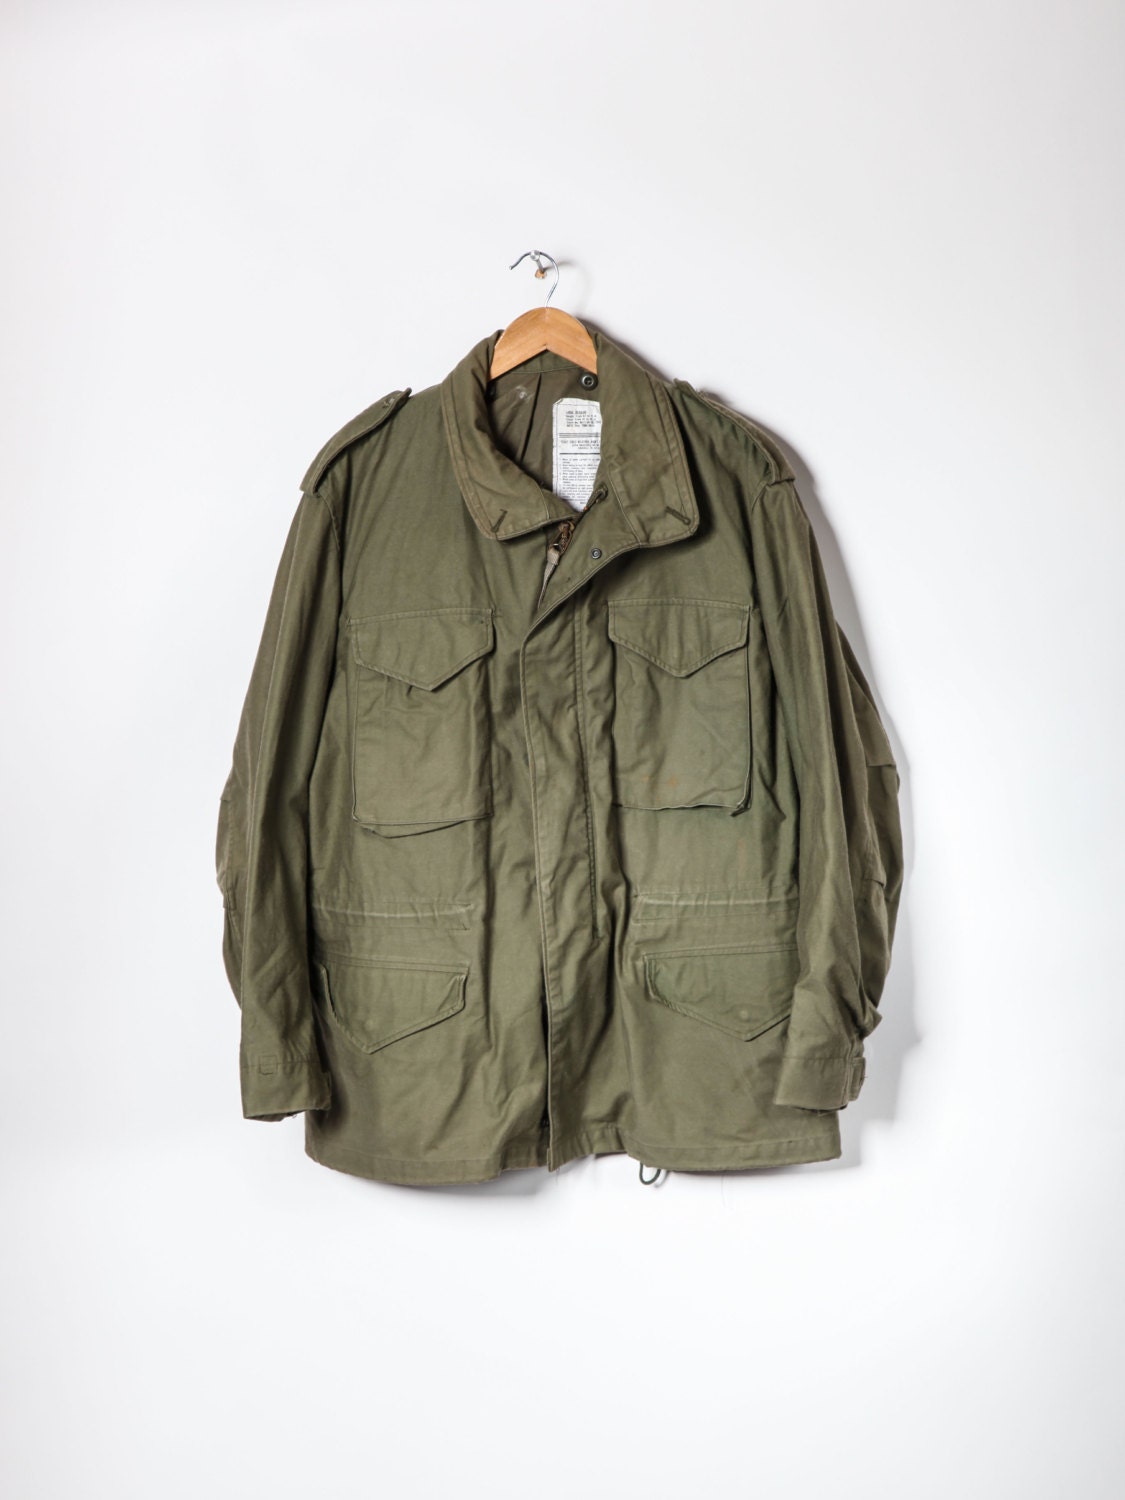 Vintage  Mens M65 Olive Green US Army Field Jacket Small/ Short